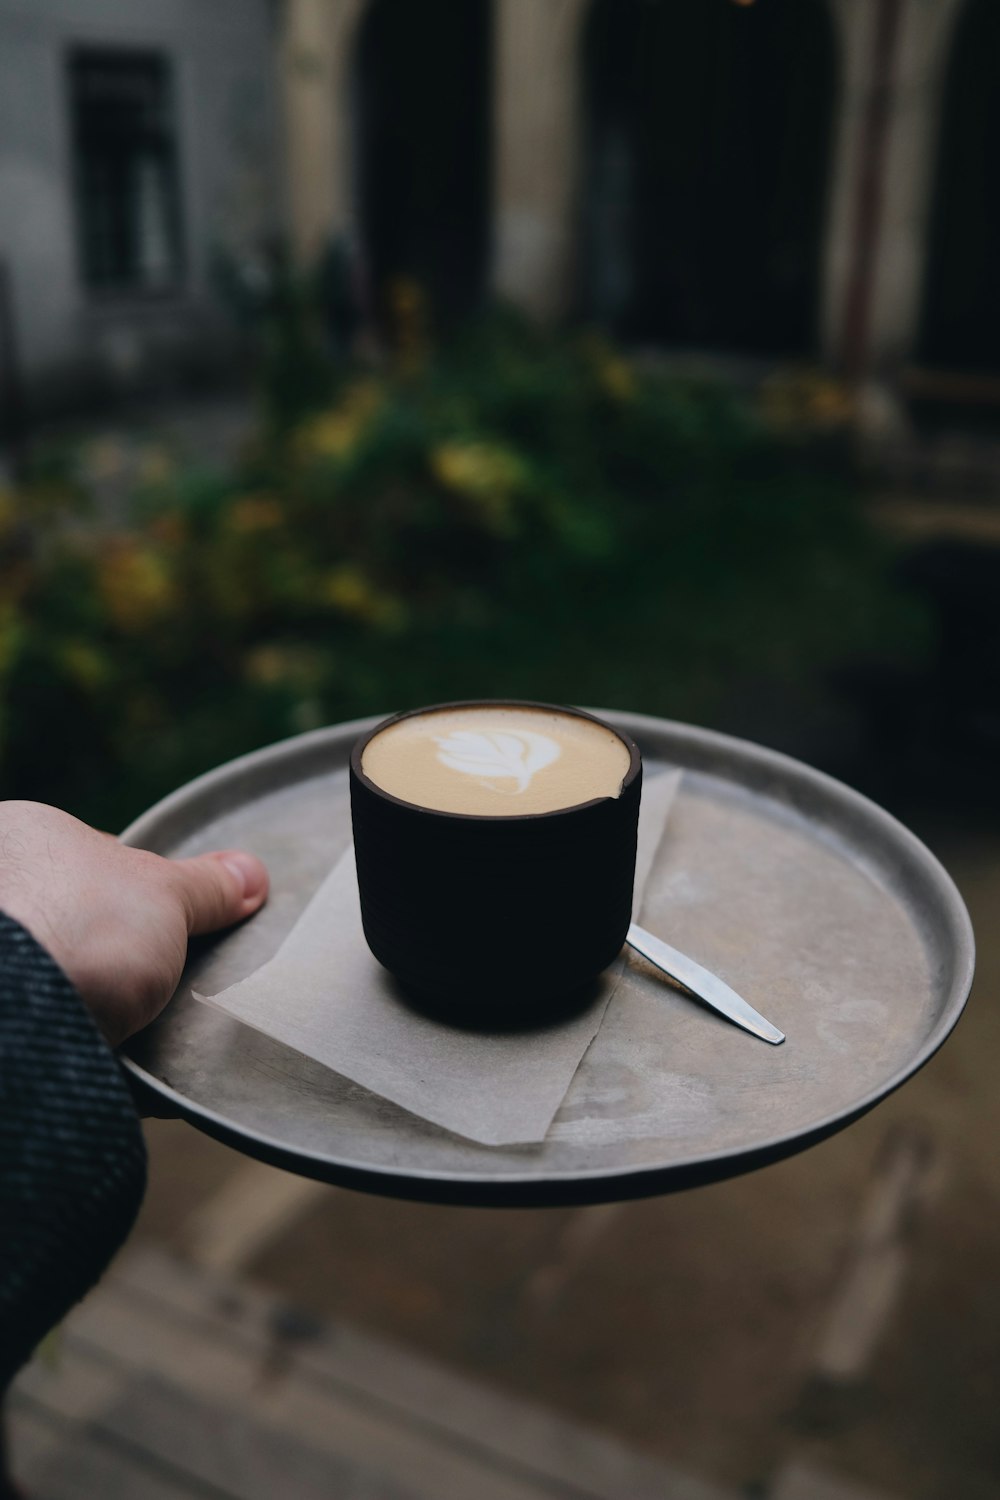 a person holding a tray with a cup of coffee on it